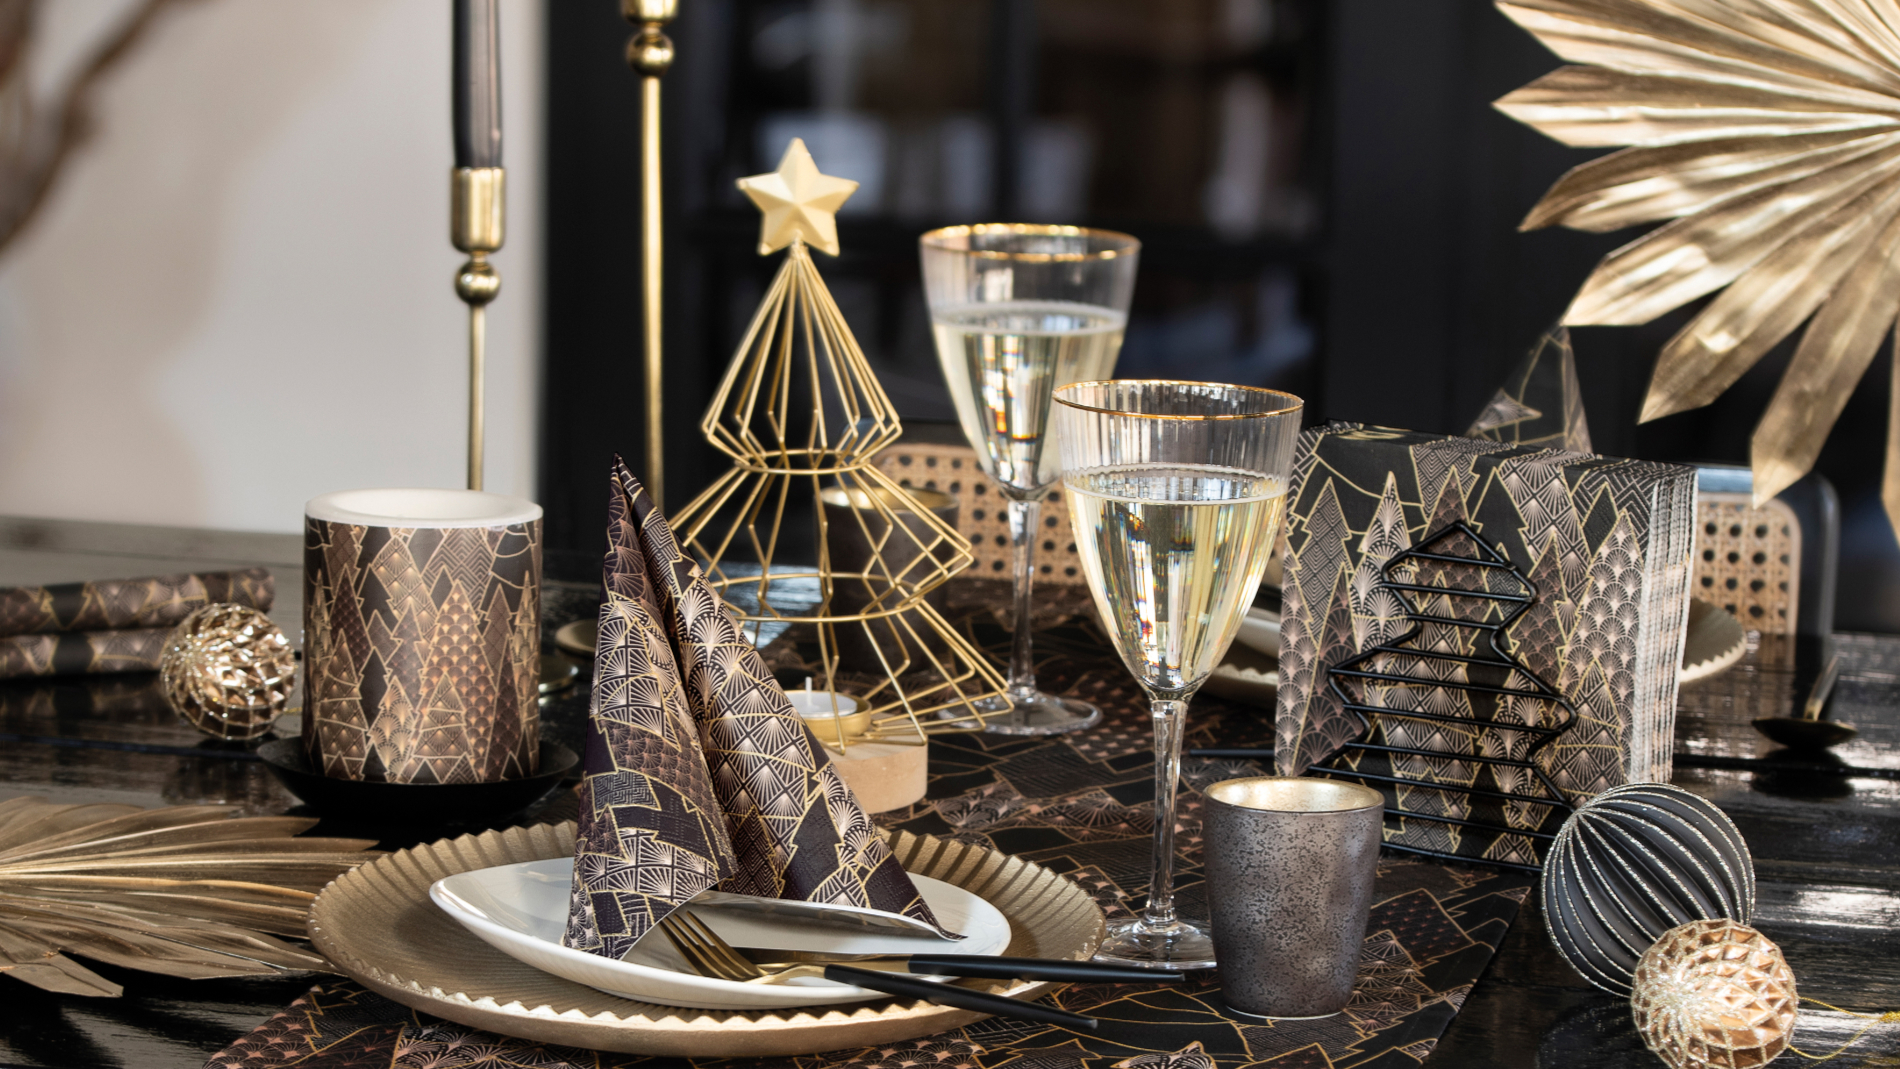 Luxury Trees in black, gold and bronze are popular and bring glamour in art deco style to the festive tables. Photo: Ambiente Europe